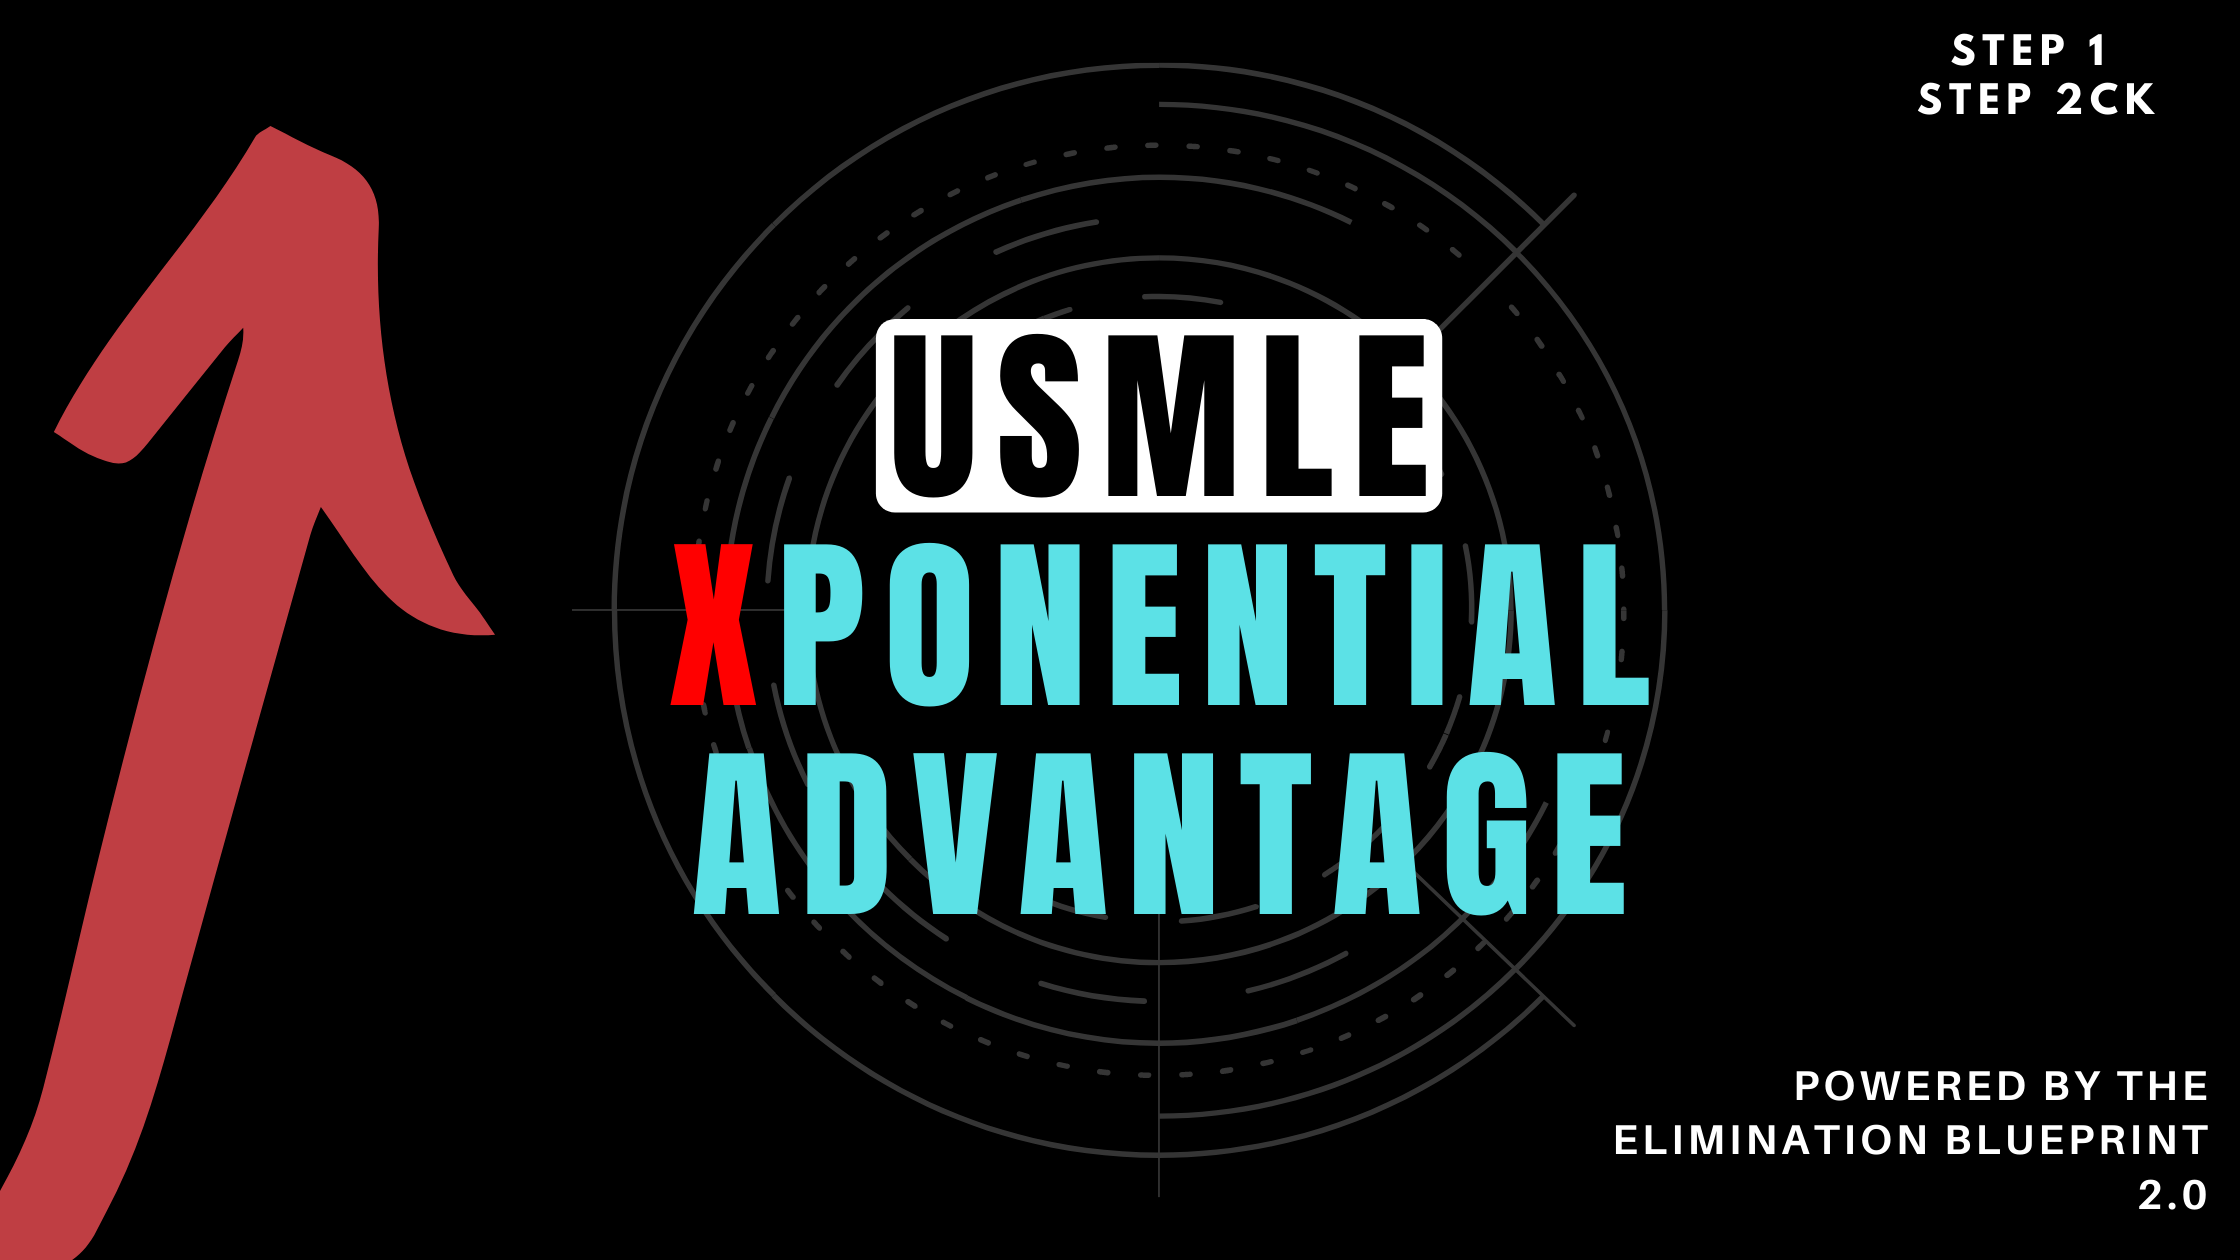 USMLE Xponential Advantage for Step 1 and Step 2CK